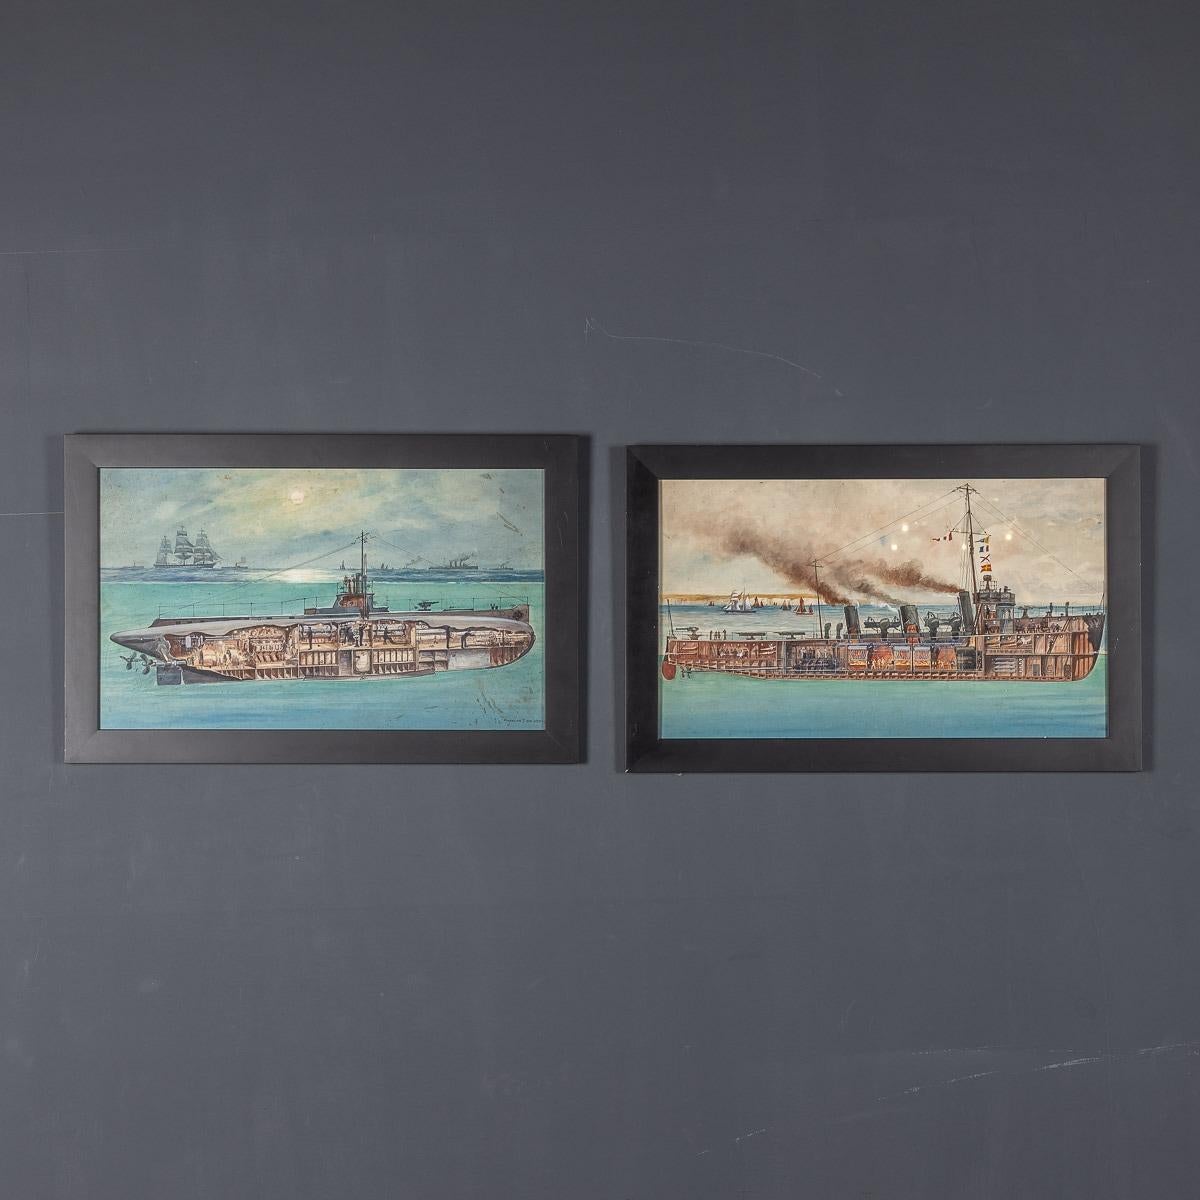 A pair of original gauche paintings by Charles John de Lacy, illustrating the interior of two different warships. These detailed cutaway technical drawings were copied into educational books. They show not only the detailed interior, but also the